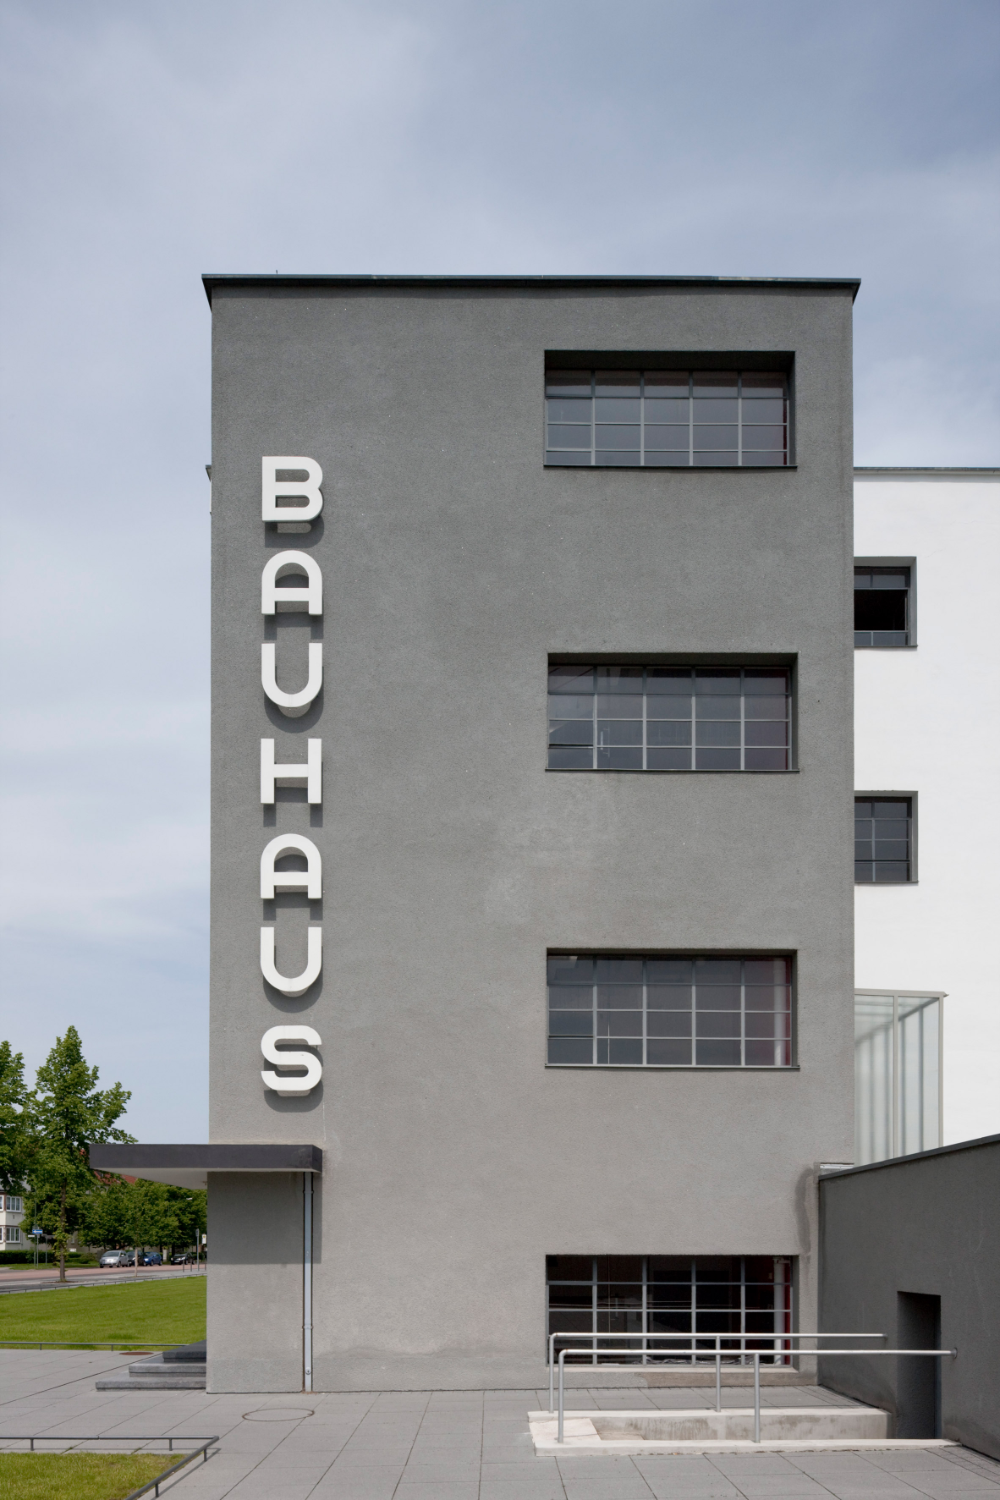 Walter Gropius designed school in Dessau to reflect the Bauhaus values.png